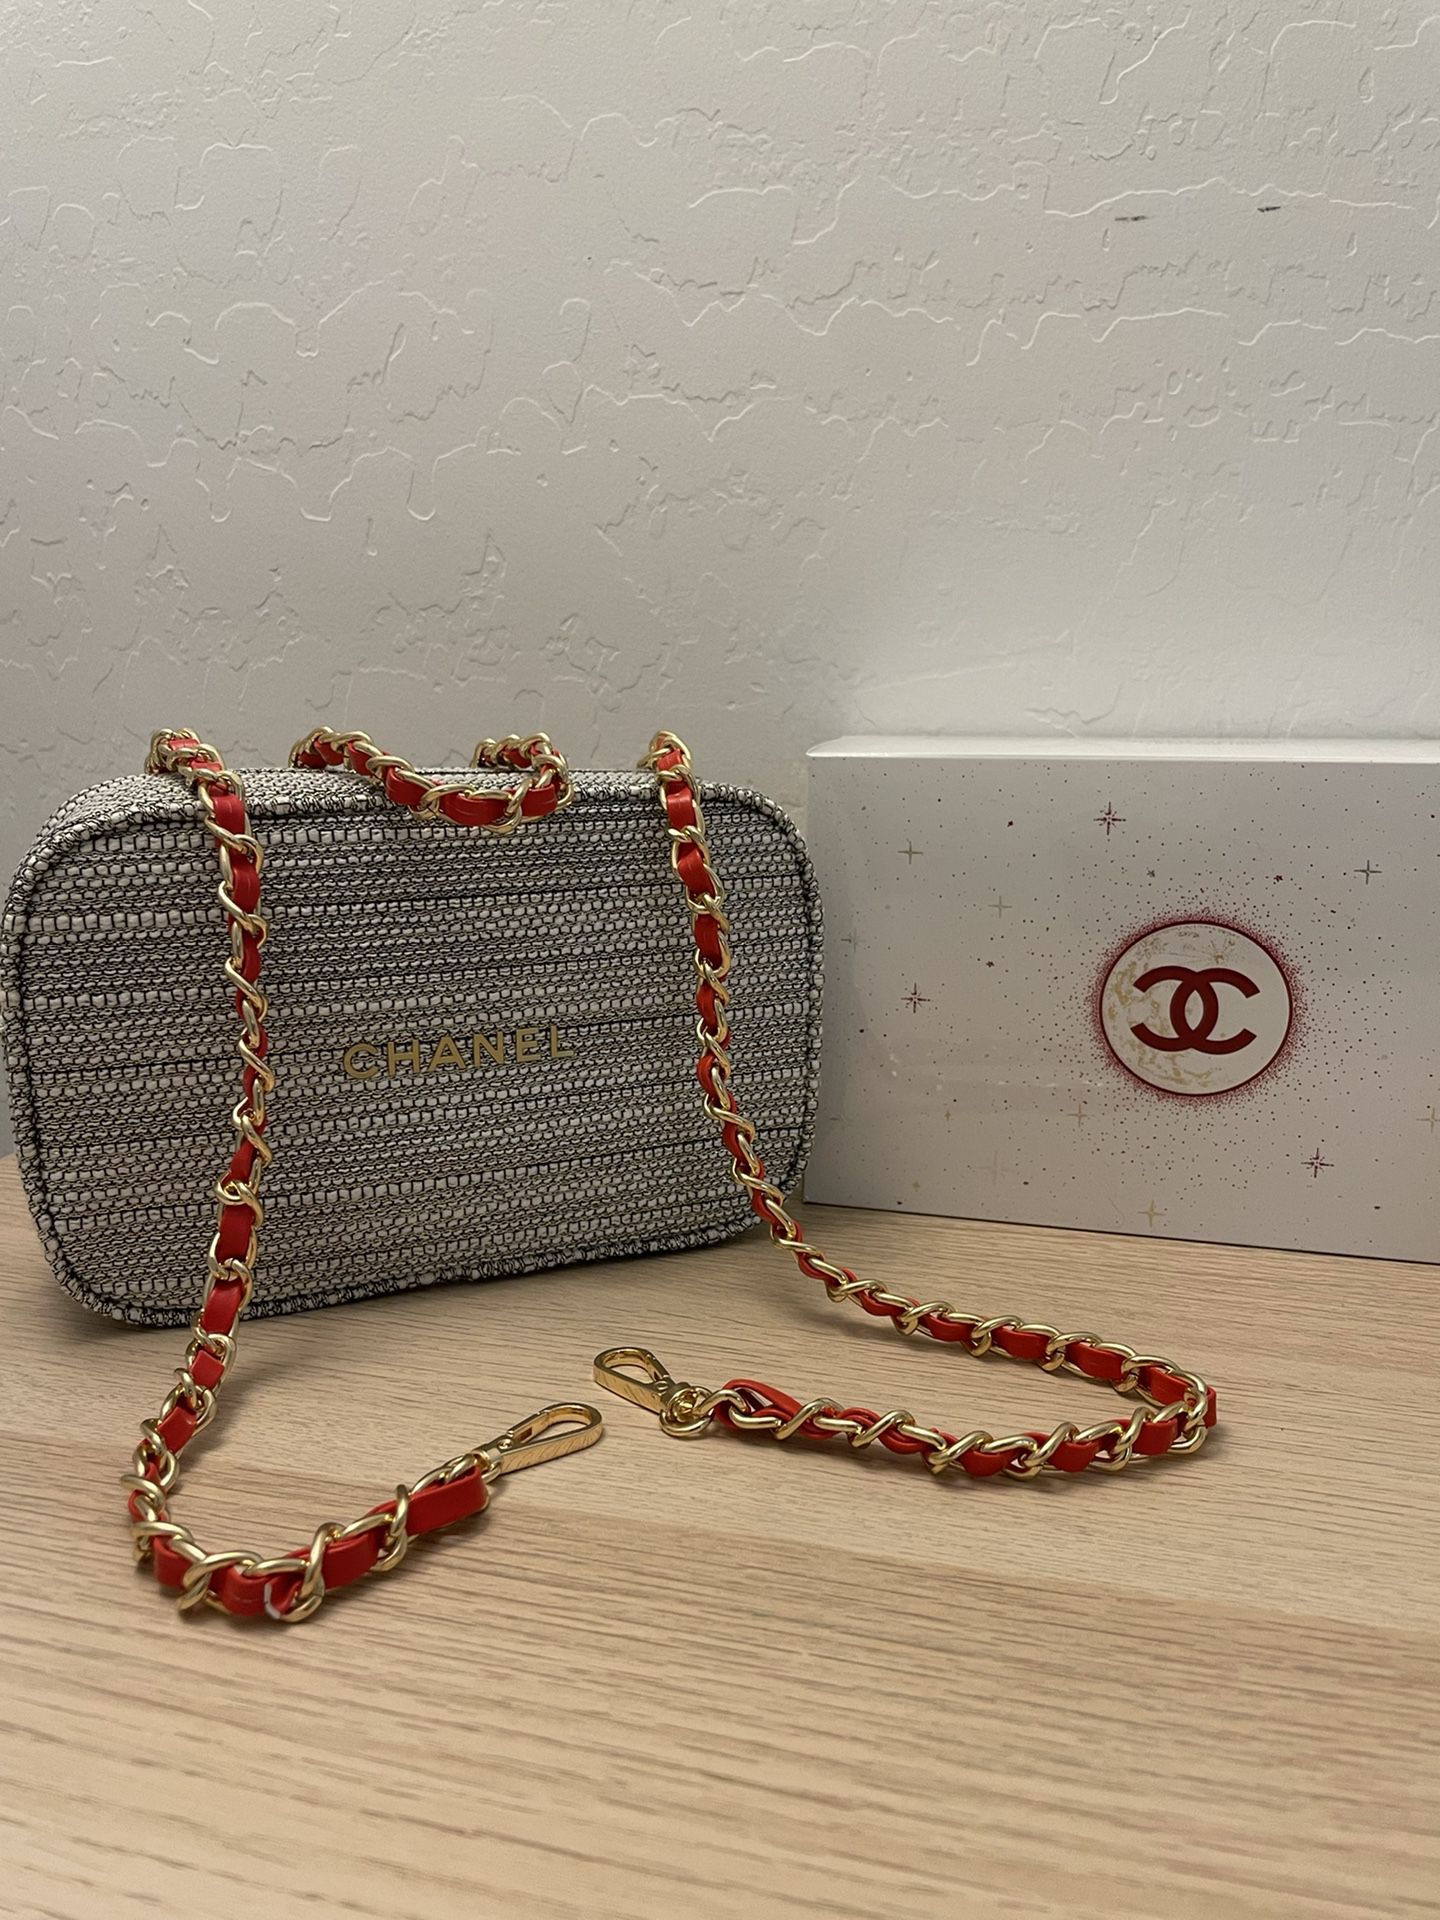 CHANEL Pouch Bag with Chain Strap 